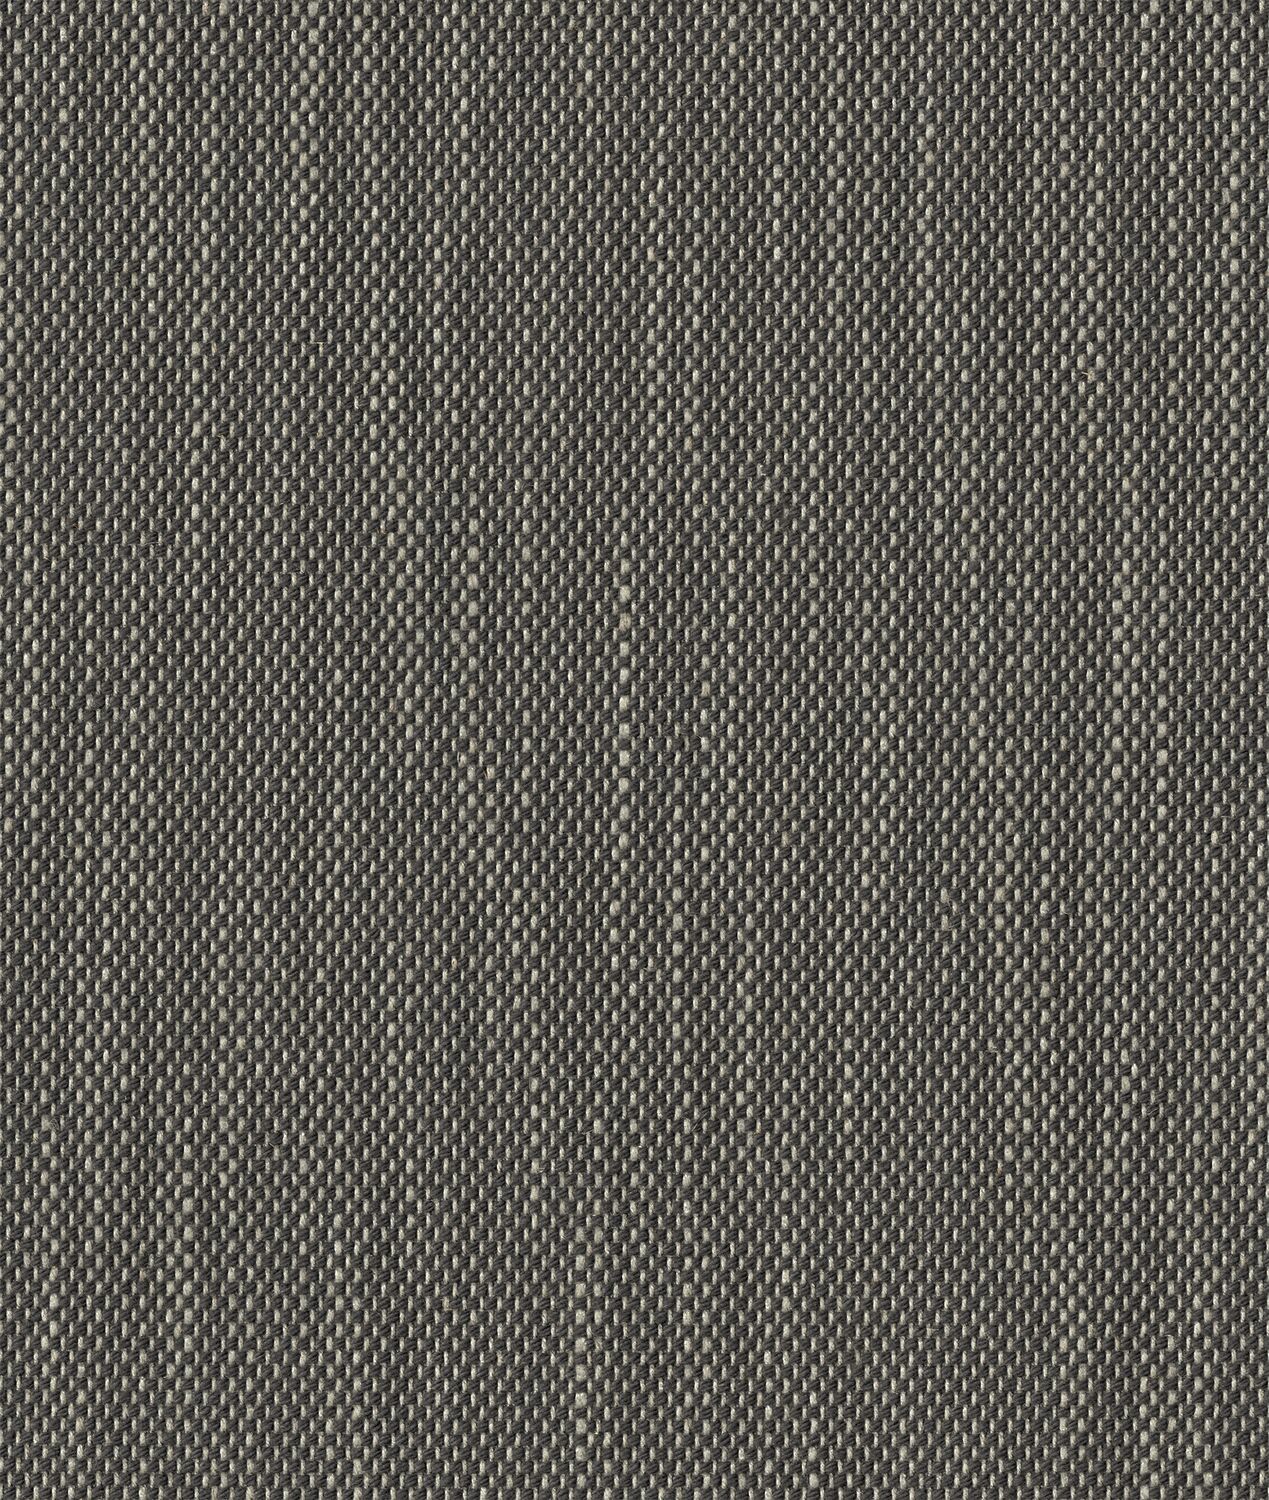 Contrast Slub - Charred Seed - 4115 - 01 Tileable Swatches